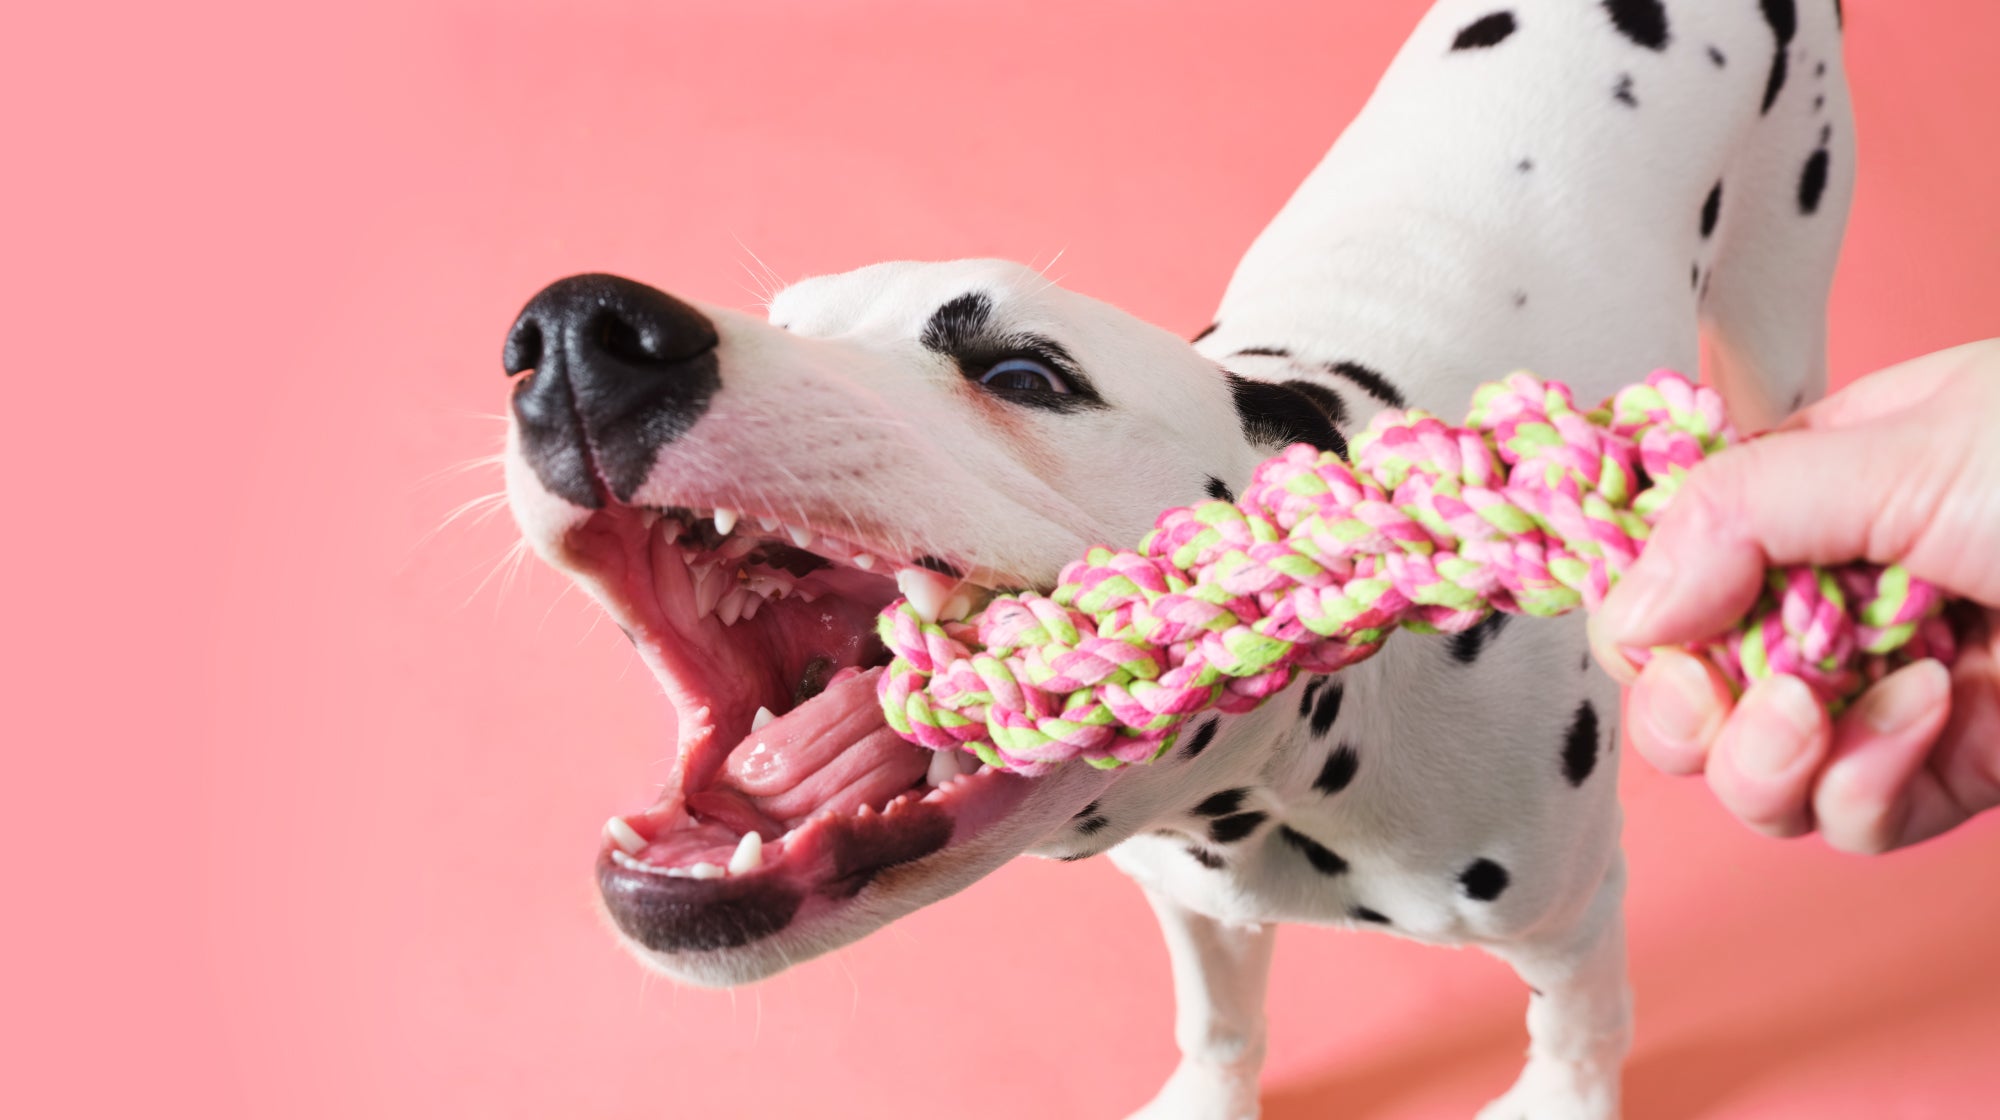 Dalmatian dog playing tug with a rope toy, against a pale pink backdrop 